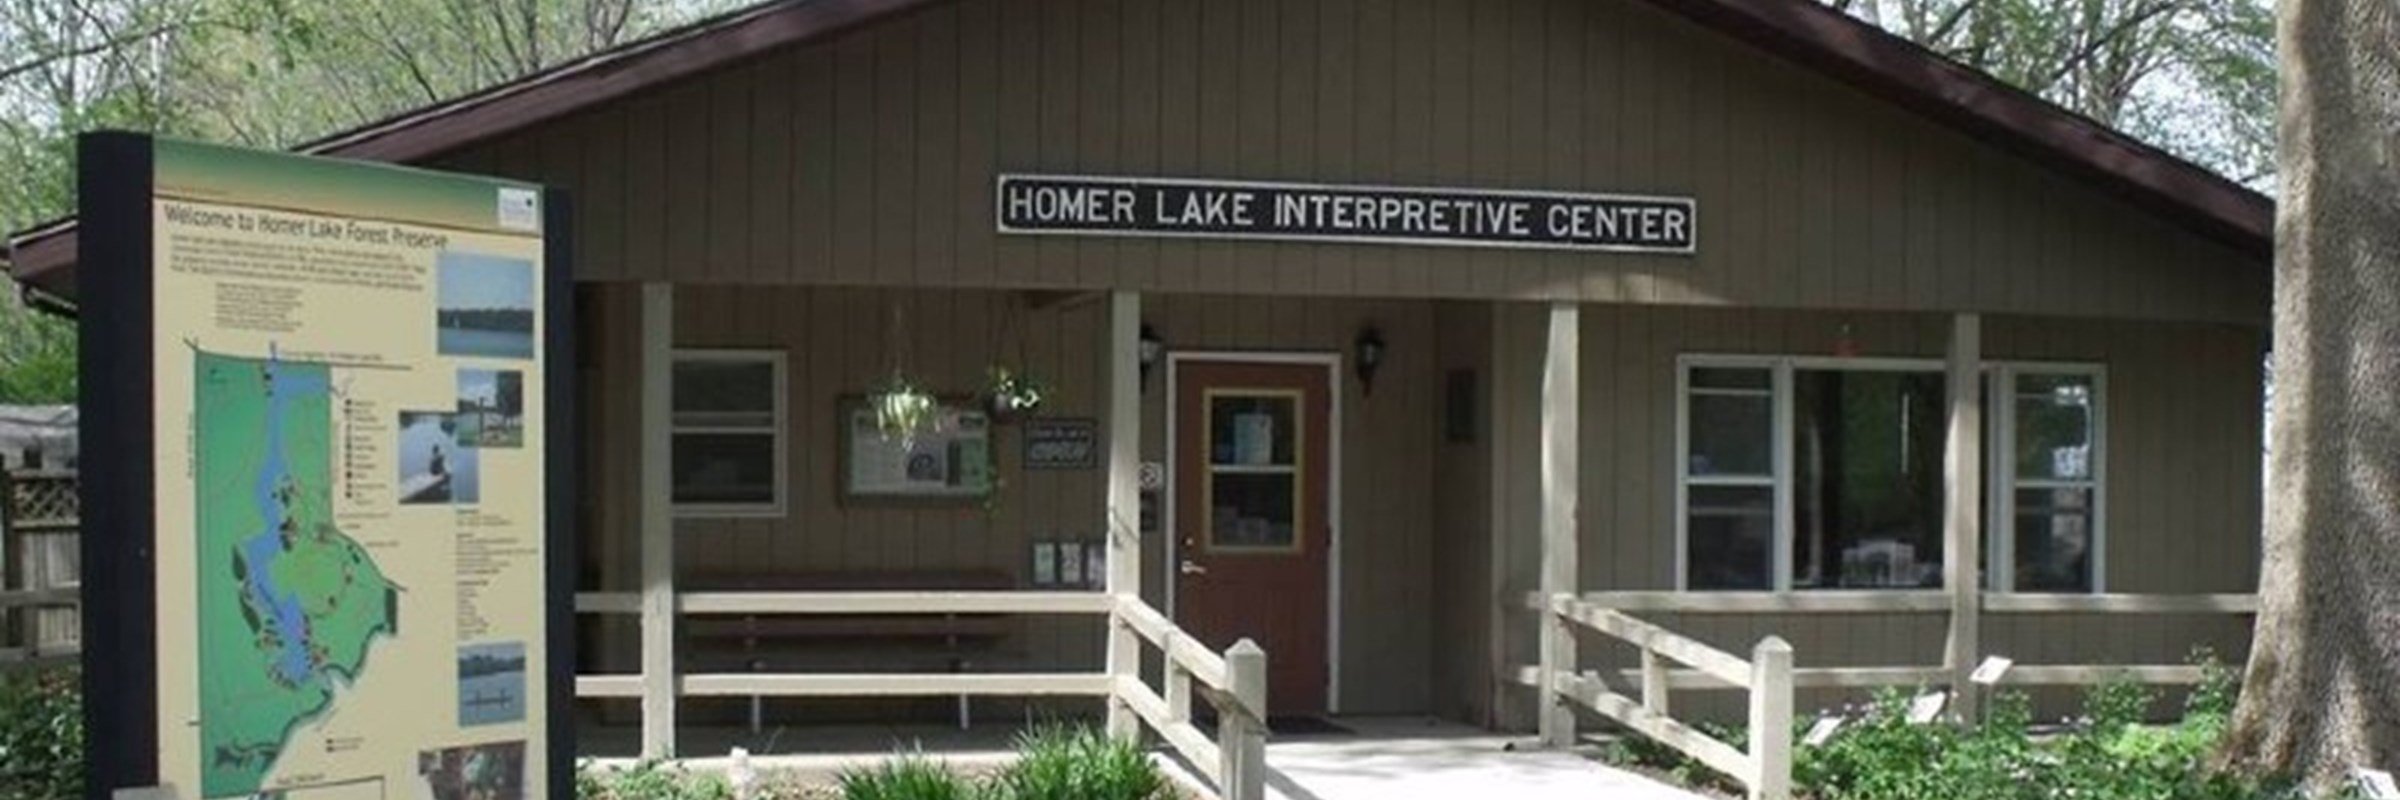 Museum of the Grand Prairie and Homer Lake Interpretive Center are Re-opening Today